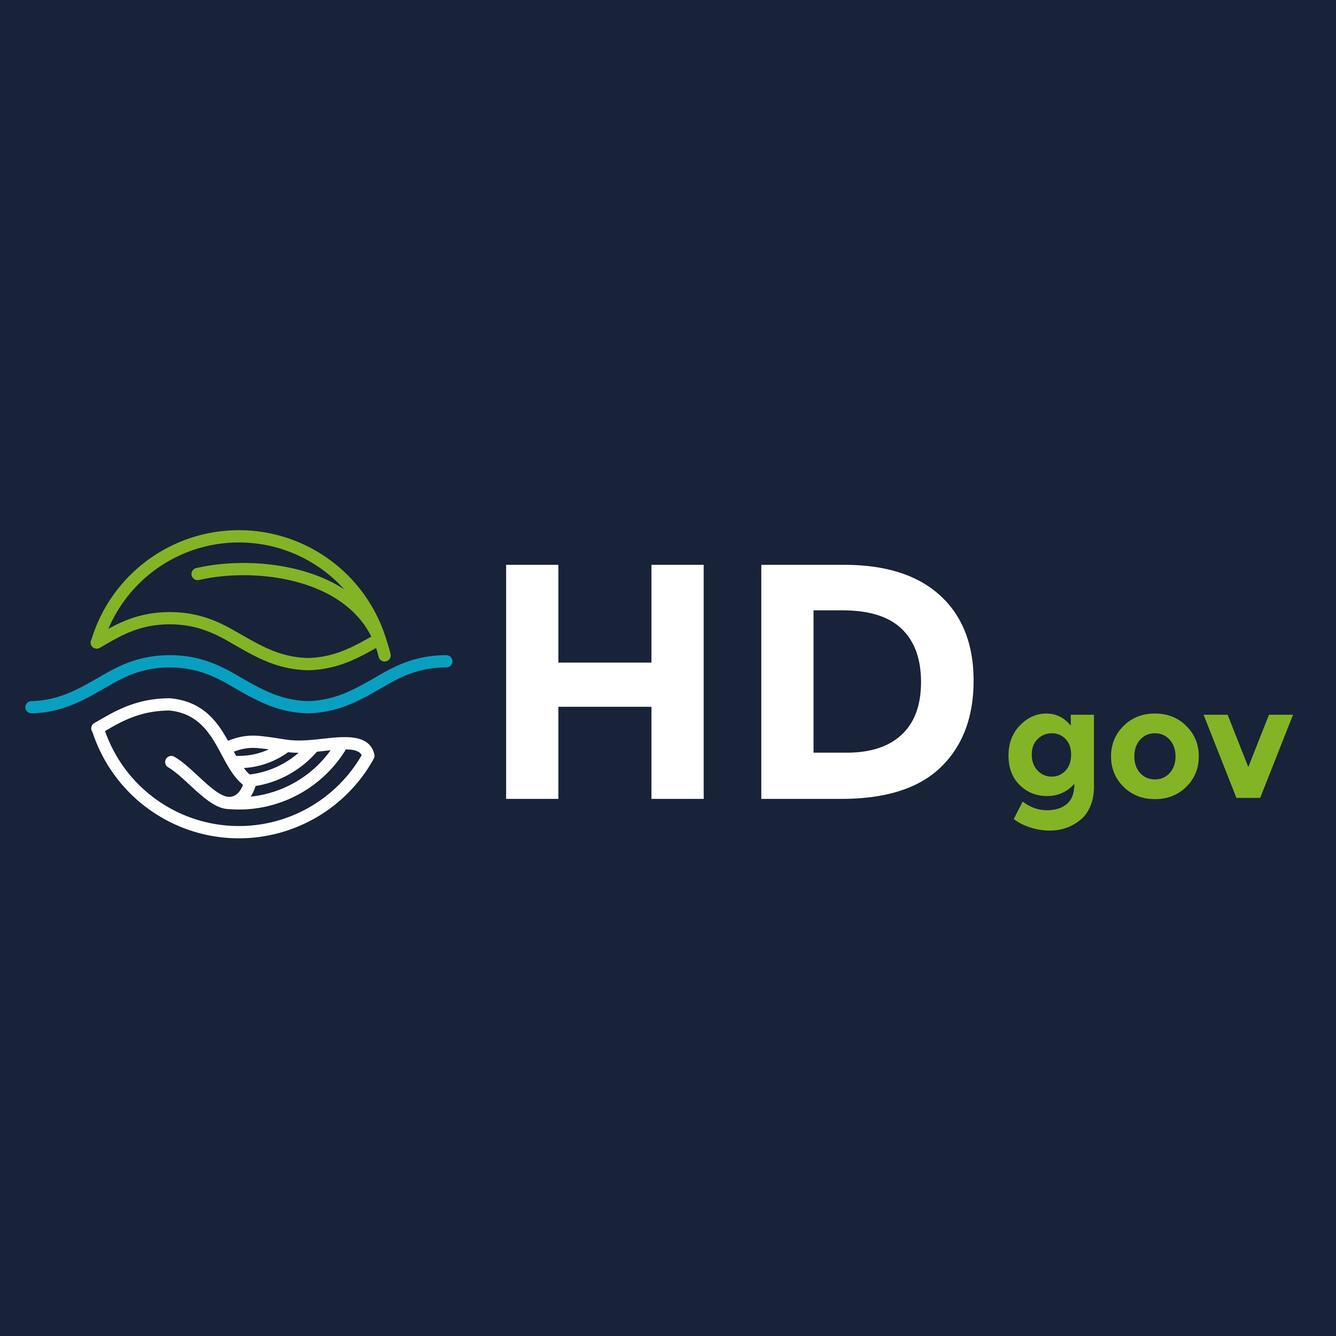 Dark Blue background with white text that says "HD gov", next to an image of a leaf and hand